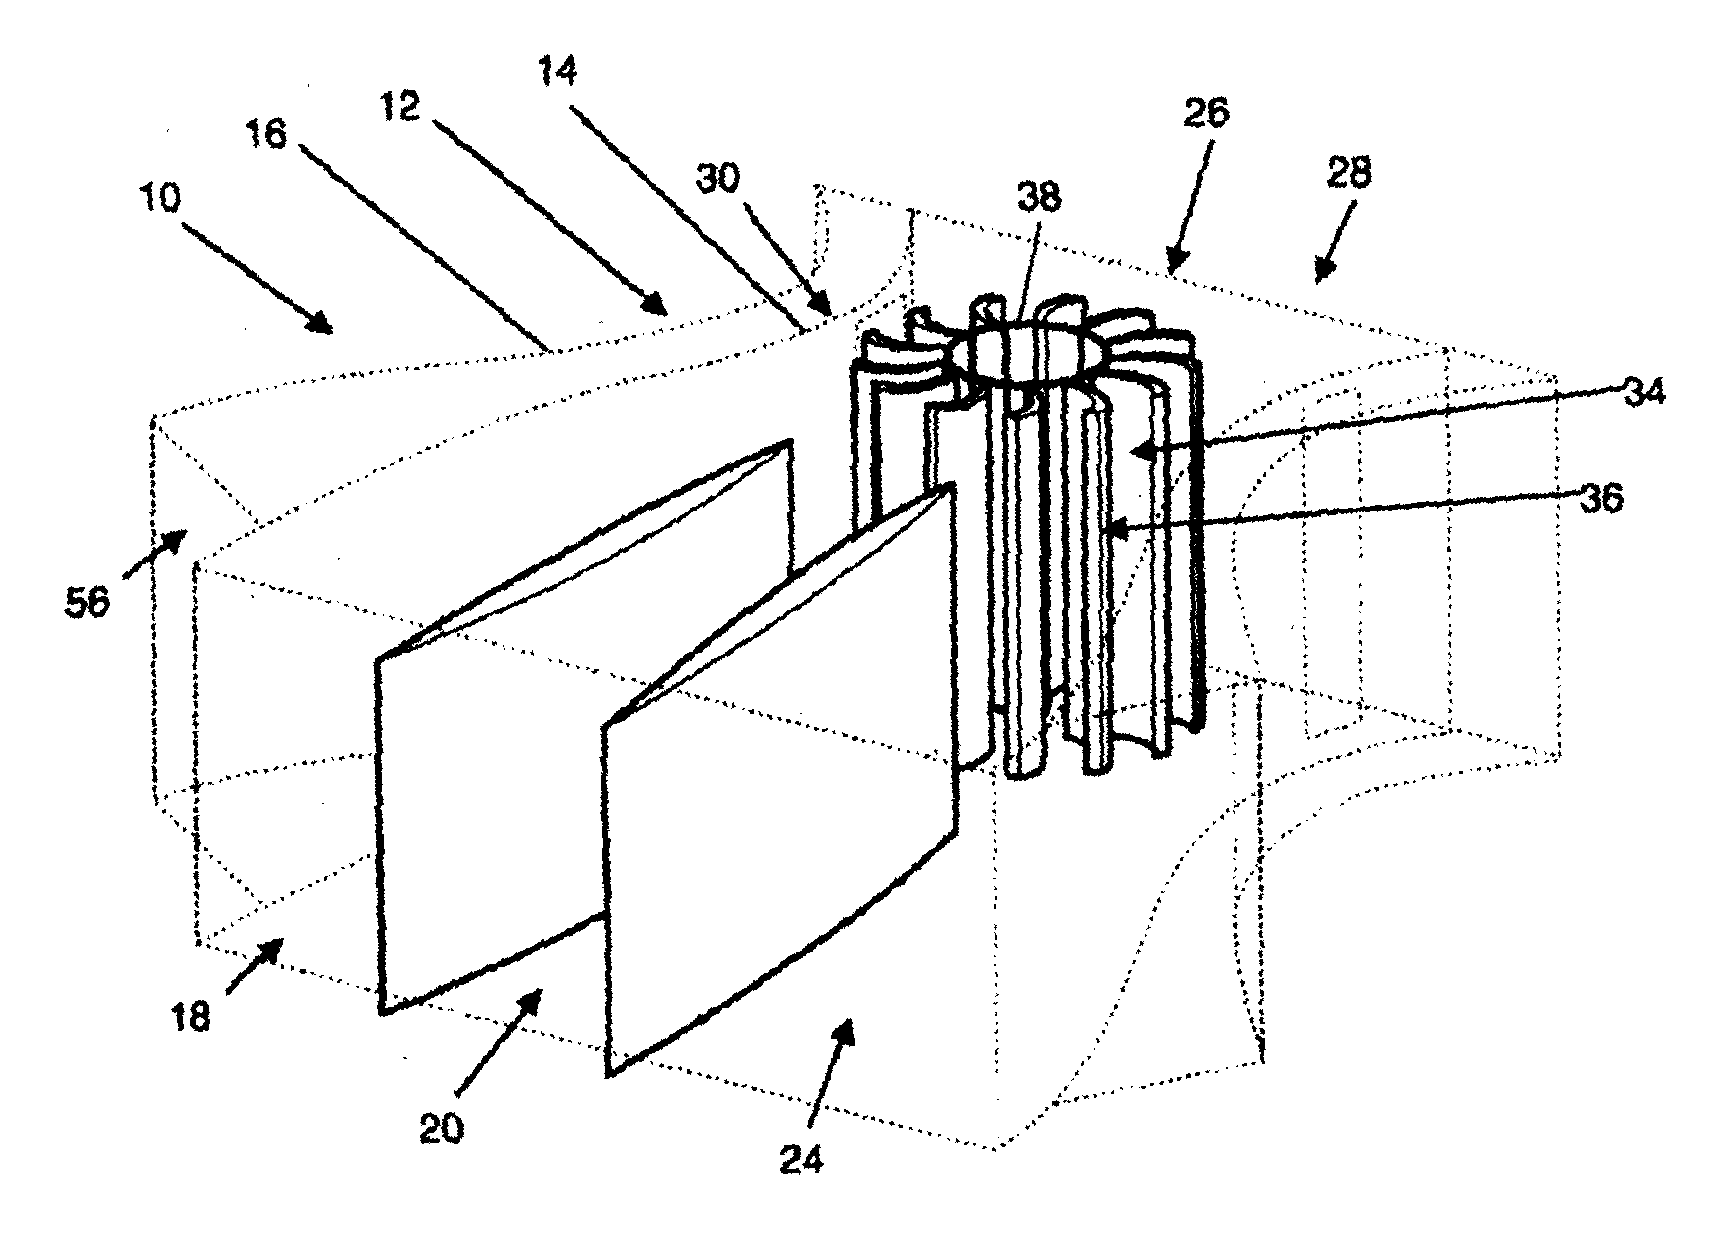 Wind turbine air flow guide device